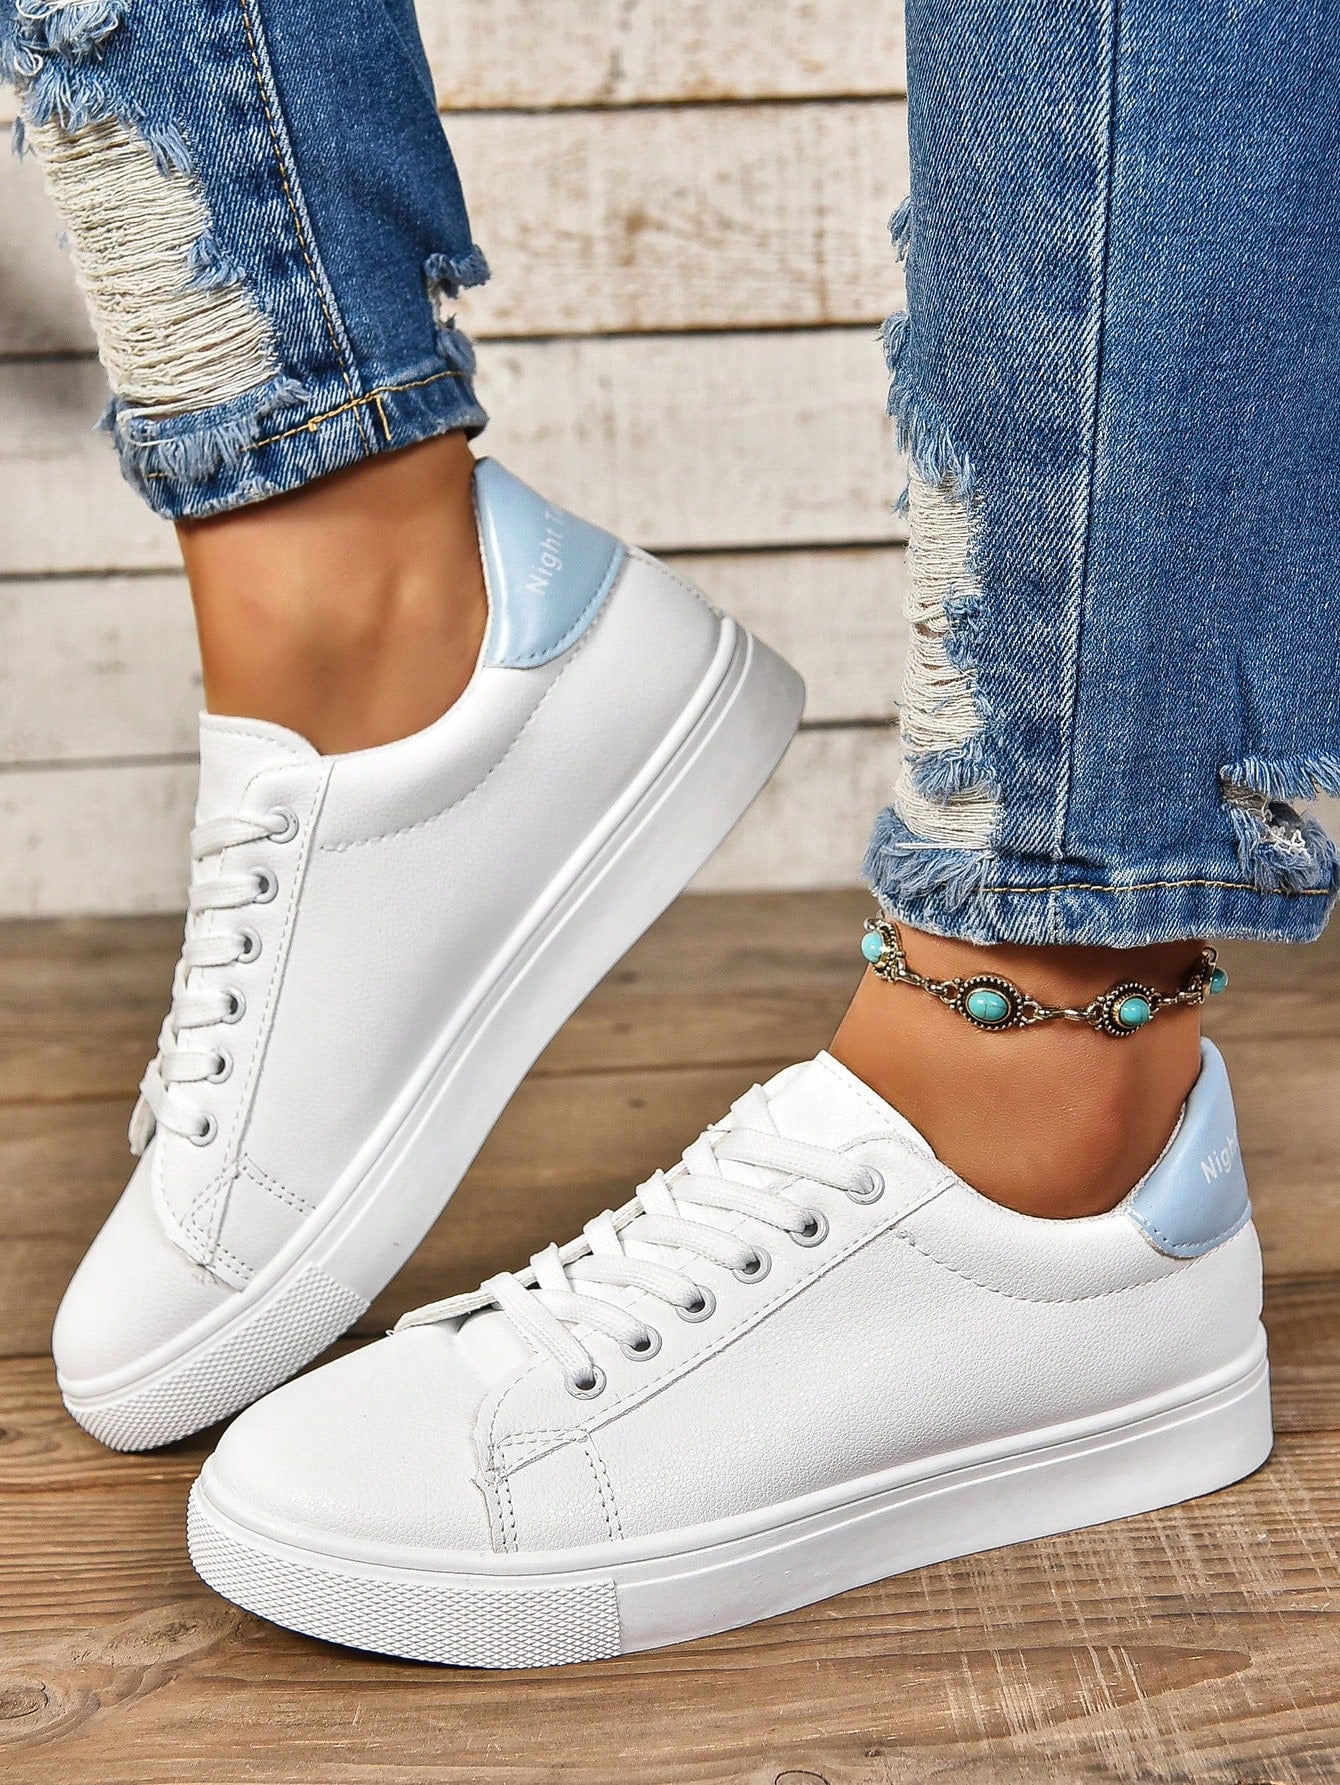 Spring/Summer Low-Cut White Sneakers, All-Match Sporty Casual Shoes, Breathable Flat-Heel Skate Shoes, Strappy Lightweight Single Shoes, White Leather Classic Student Shoes-Blue-1